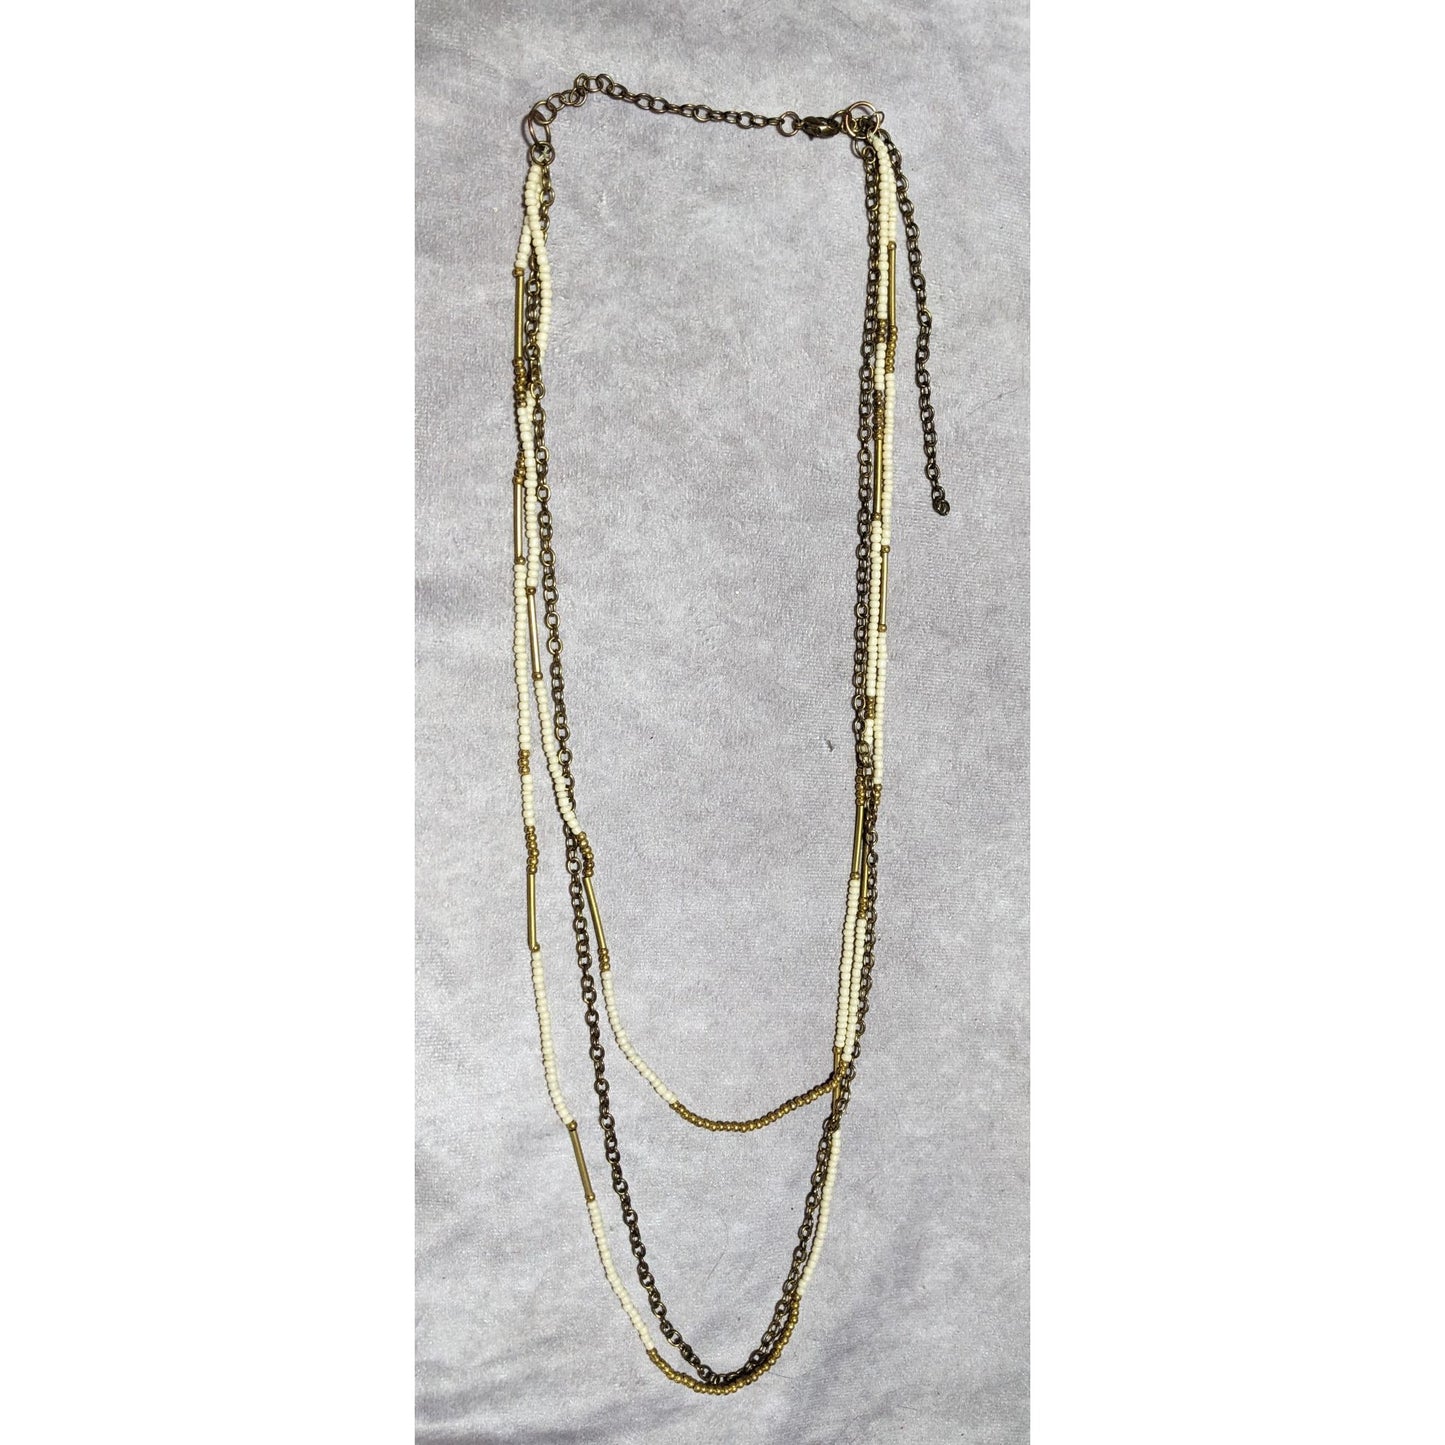 Gold White Multilayer Bohemian Necklace